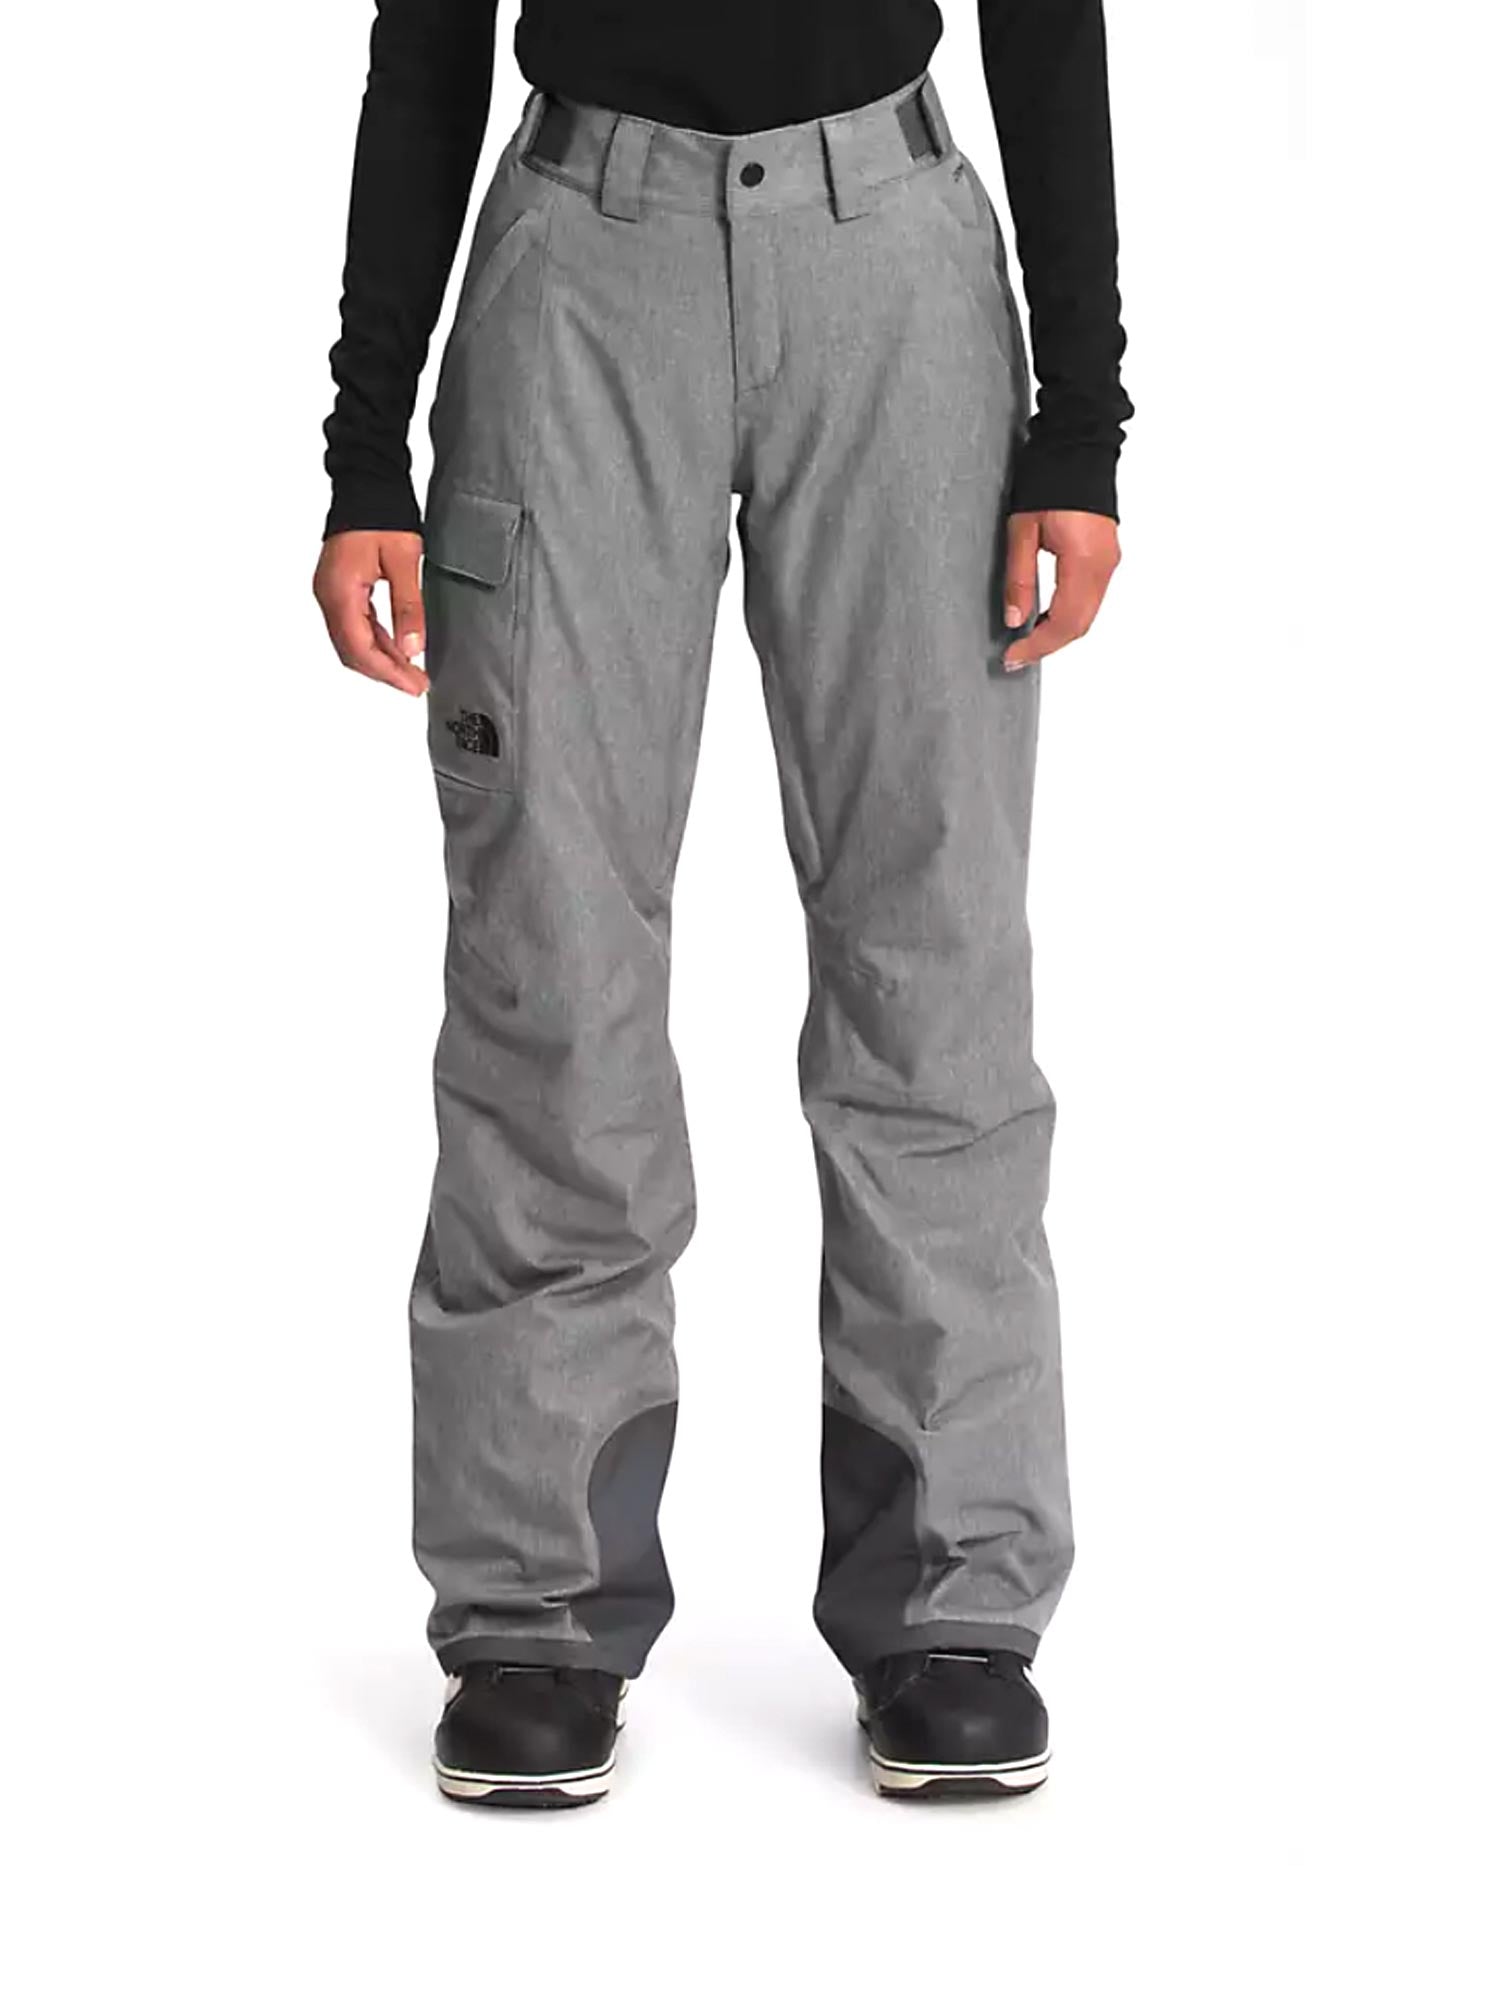 The North Face Freedom Insulated Pant - Women's